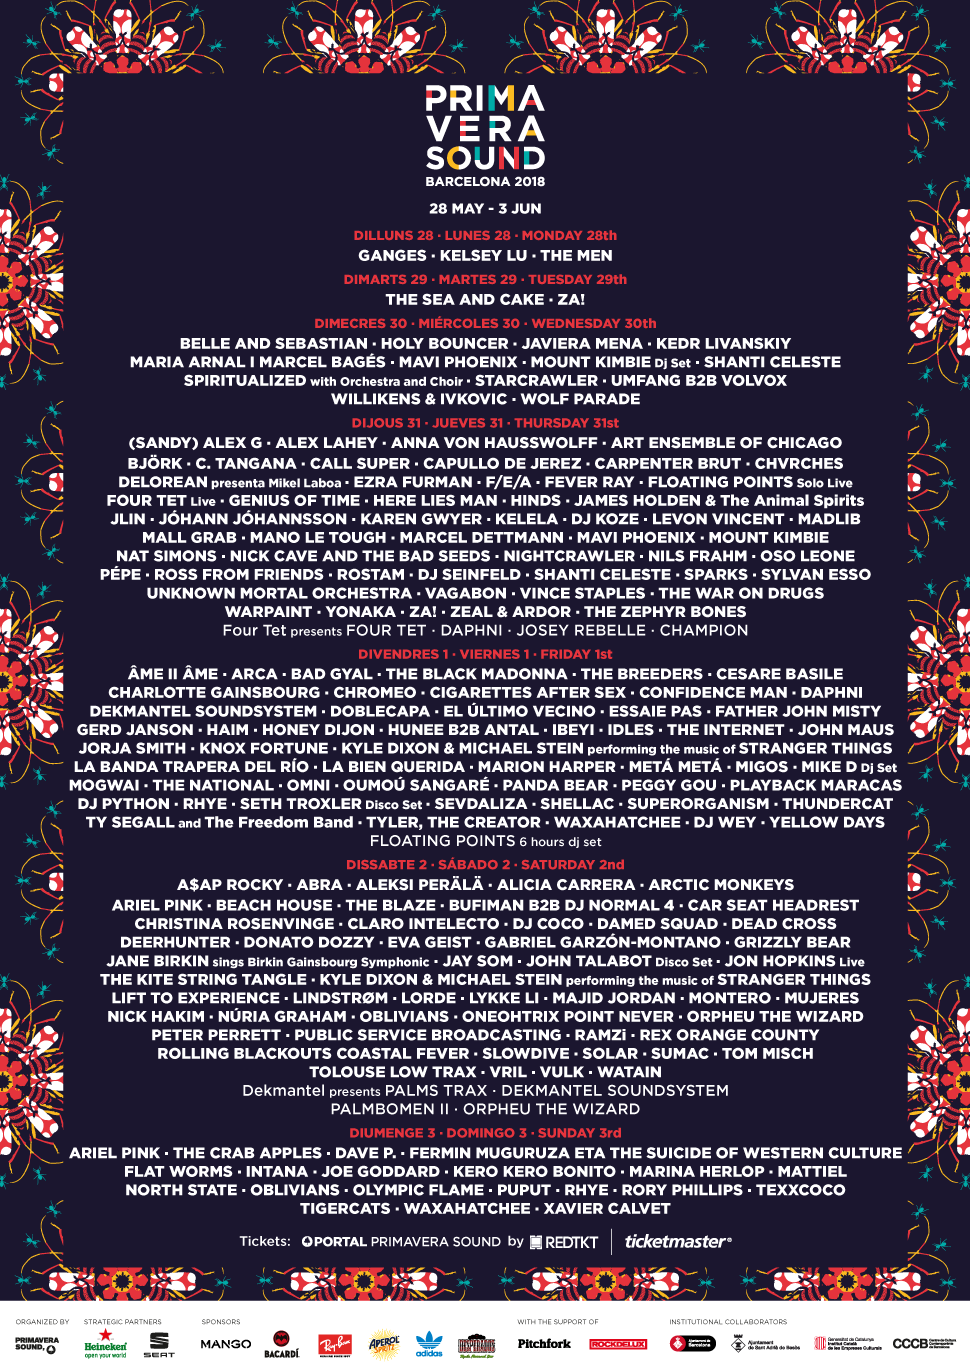 Primavera Sound 2018 Lineup Announced: Lorde, Björk, Arctic Monkeys and More